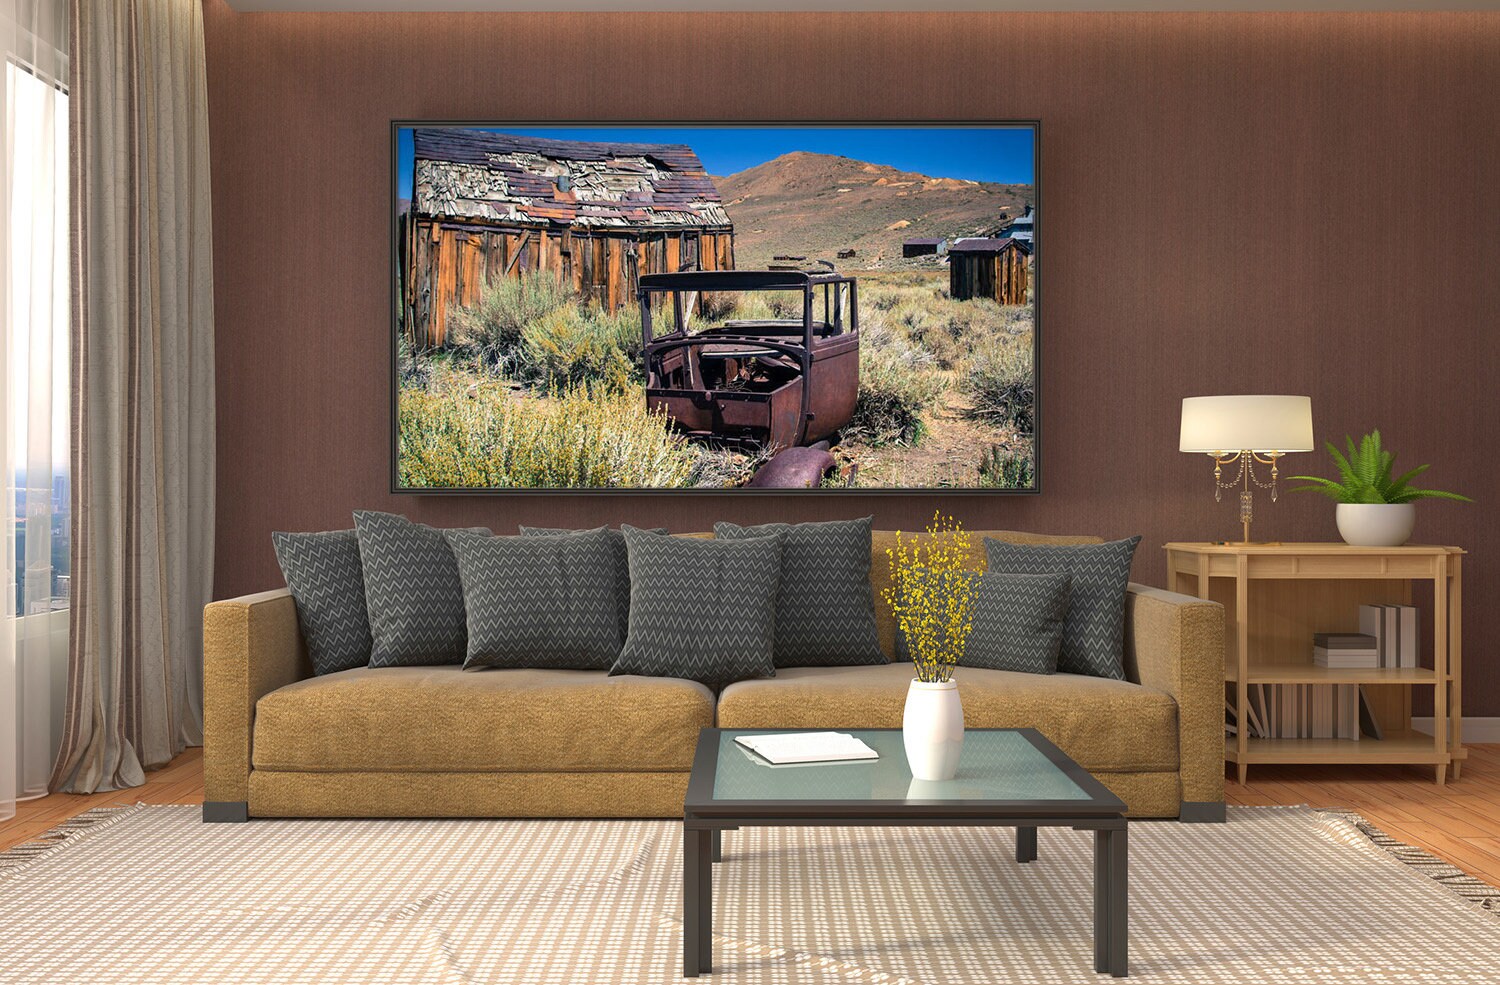 Ghosts of Bodie #1, Ghost Town, Model A Ford, California Wall Art, Vintage Car Art, Classic Car Decor, Abandoned Town Art, Man Cave Decor